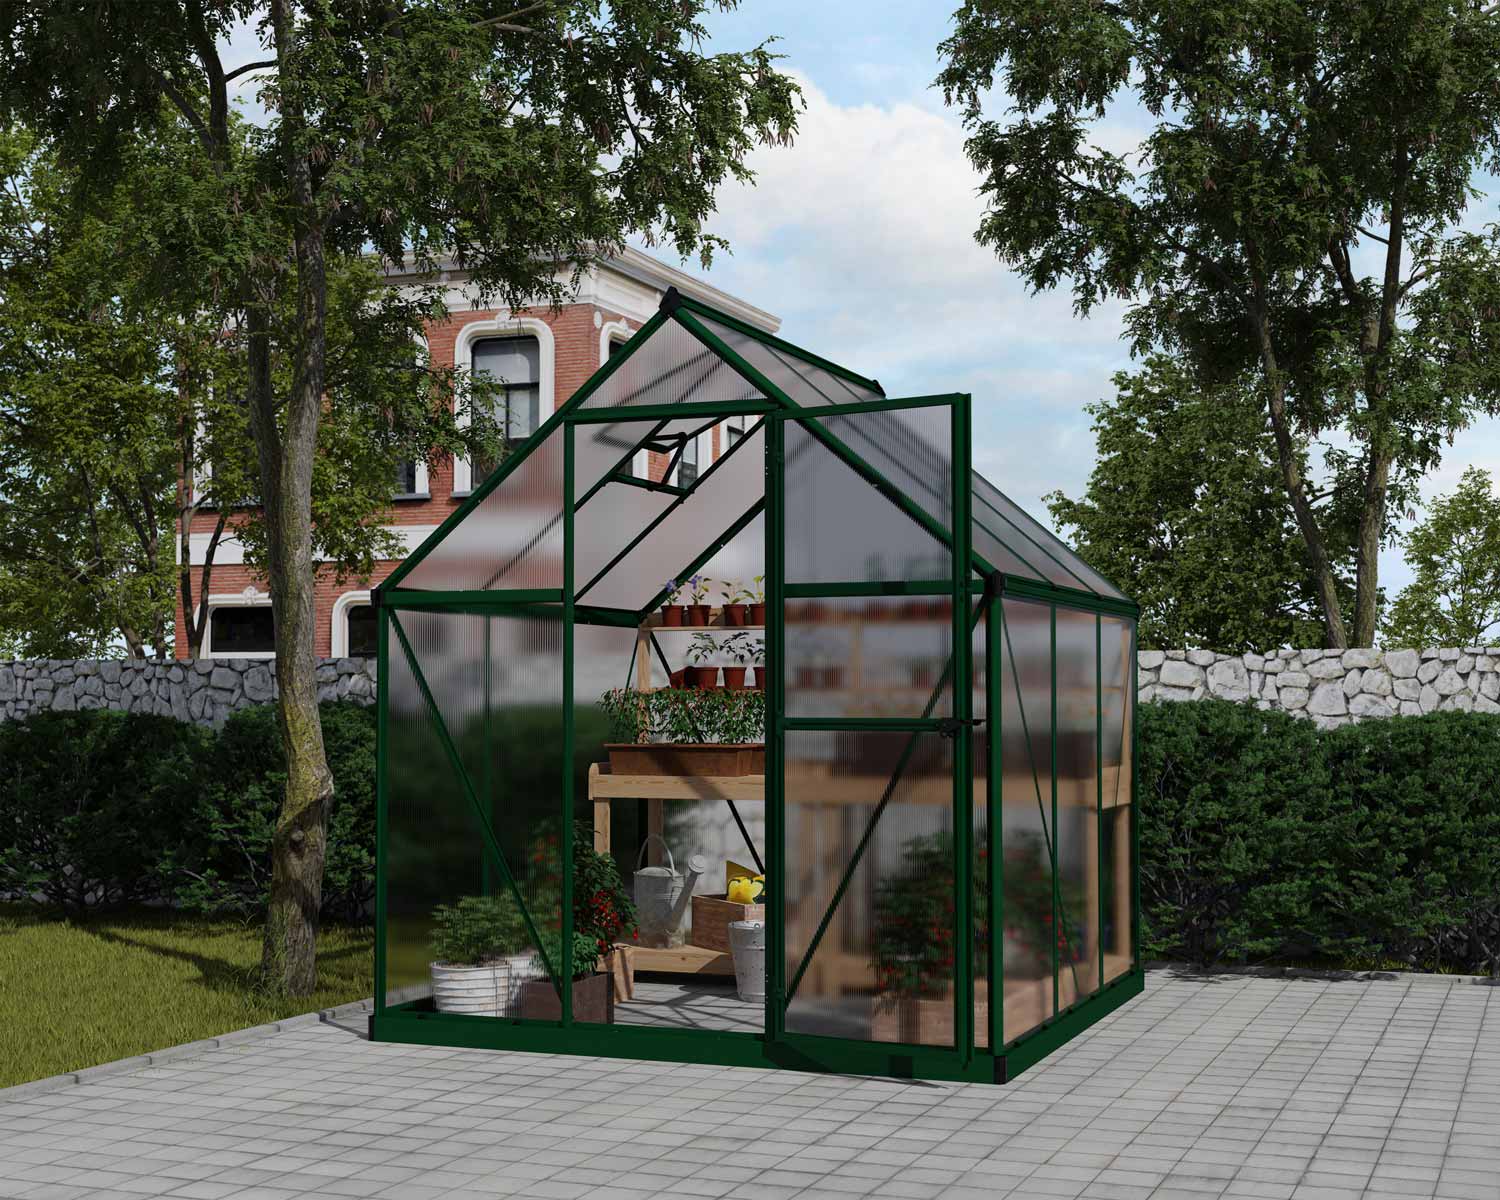 Greenhouse Mythos 6&#039; x 6&#039; Green Structure &amp; Twinwall Panels outside on a lawn